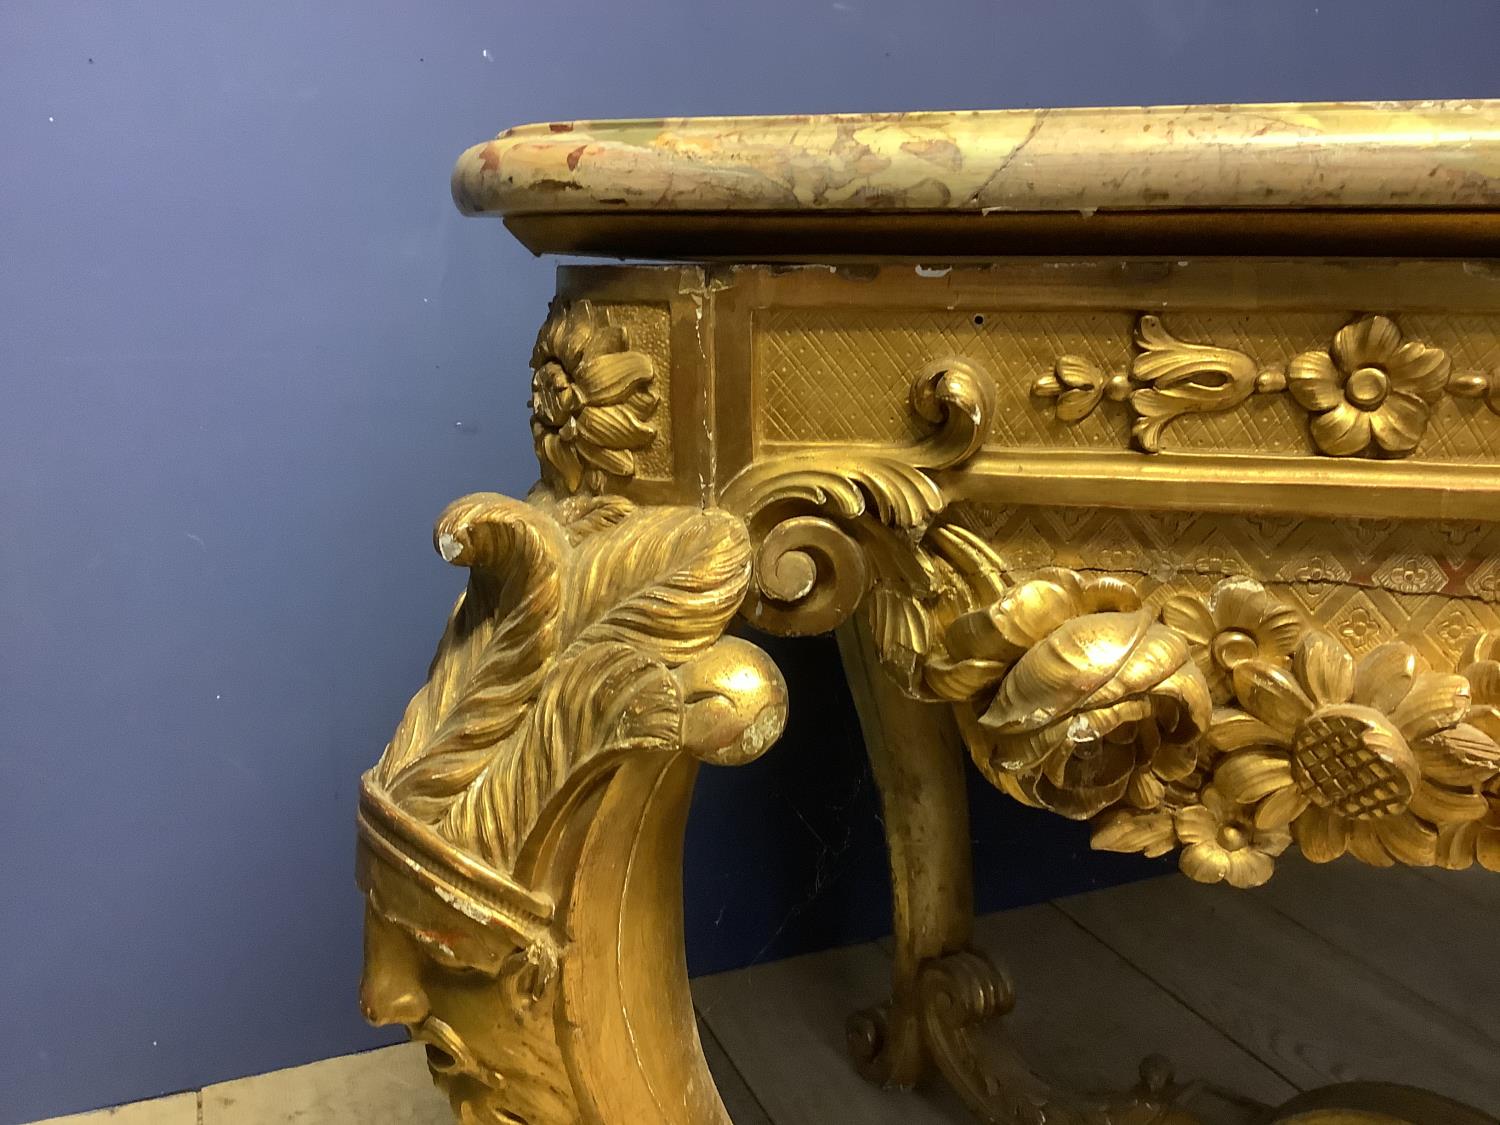 Early C18th/C19th giltwood side table in the manor of William Kent, elaborately carved & gilded unde - Image 6 of 12